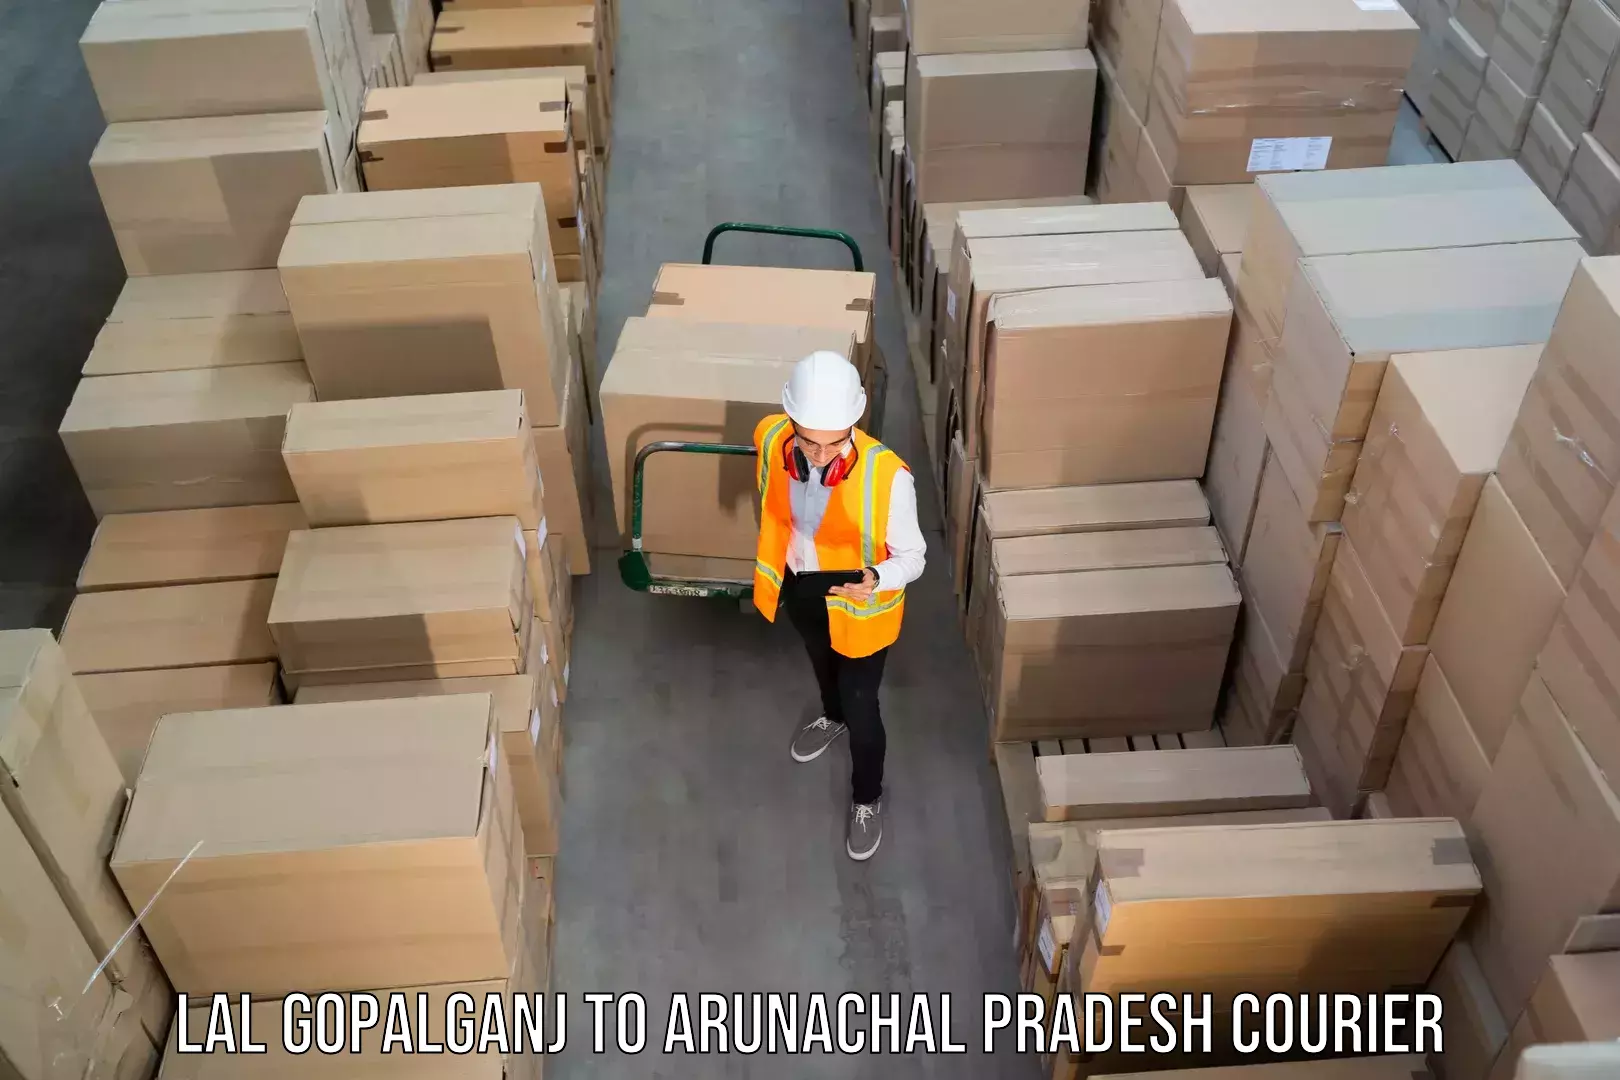 State-of-the-art courier technology Lal Gopalganj to West Siang